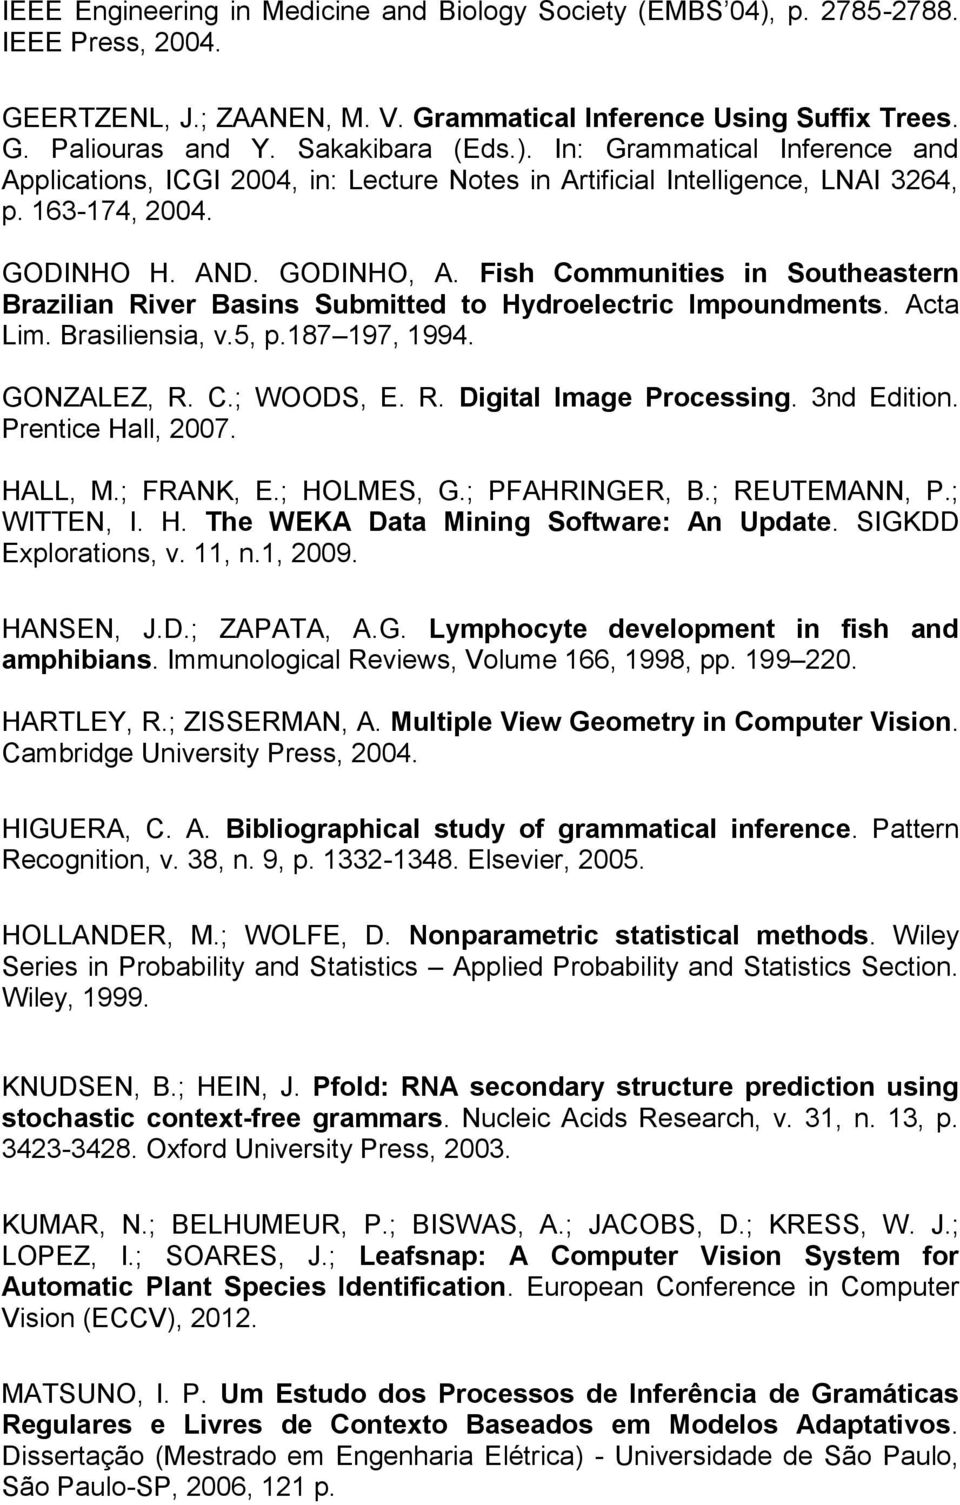 Fish Communities in Southeastern Brazilian River Basins Submitted to Hydroelectric Impoundments. Acta Lim. Brasiliensia, v.5, p.187 197, 1994. GONZALEZ, R. C.; WOODS, E. R. Digital Image Processing.